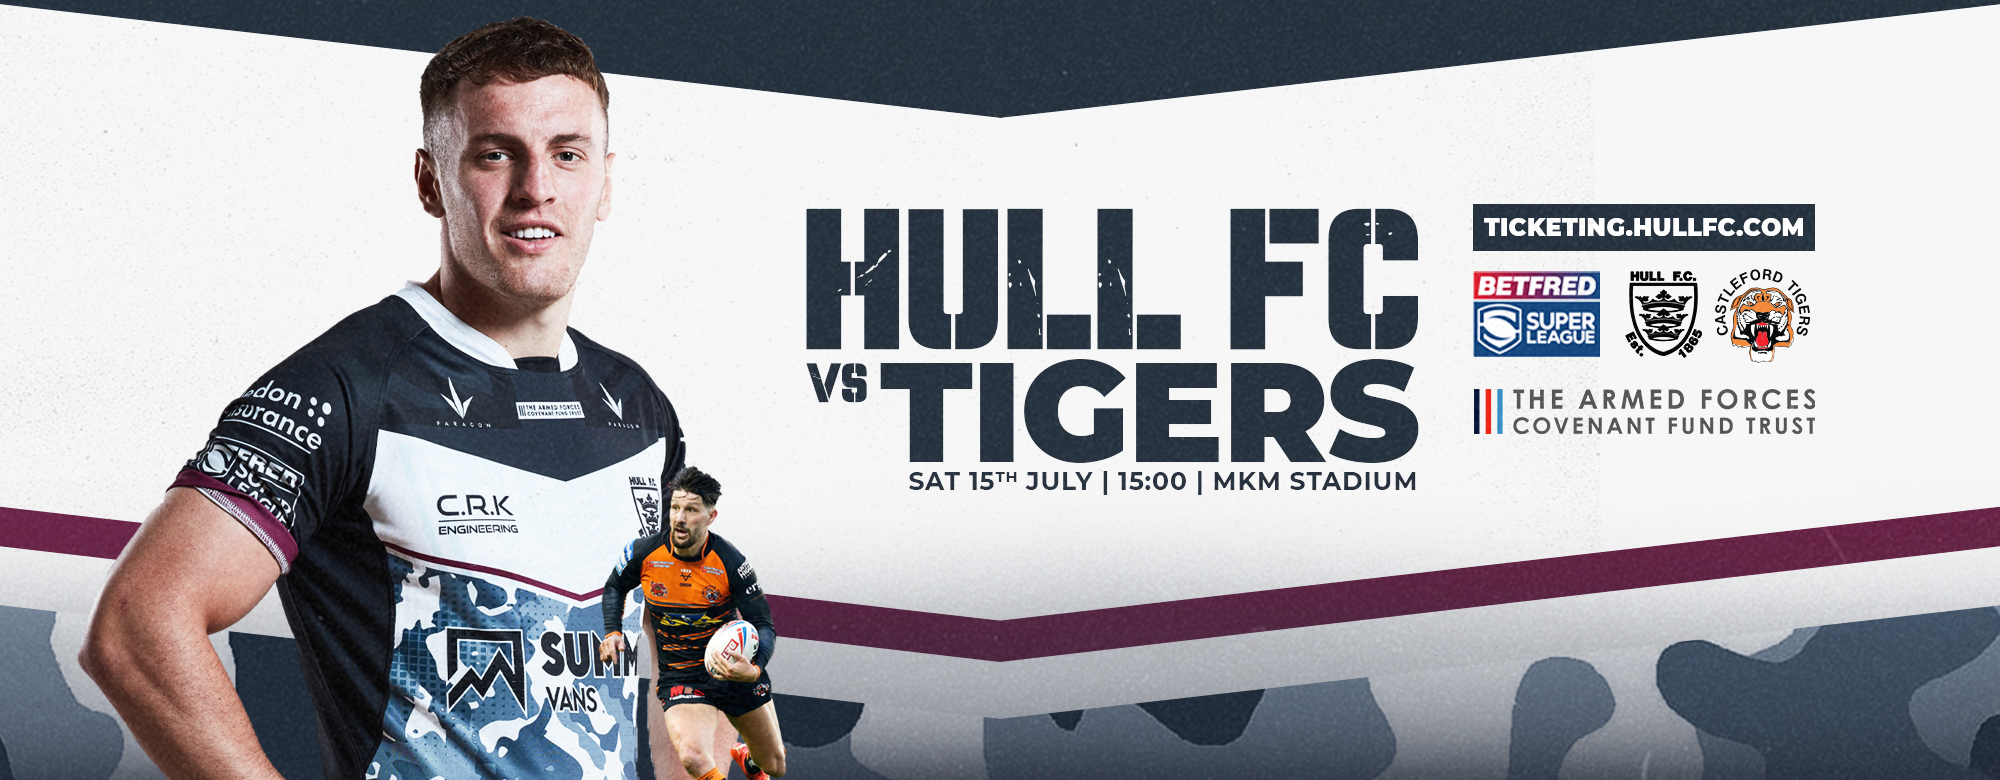 Armed Forces Match Day Returns For Castleford Fixture